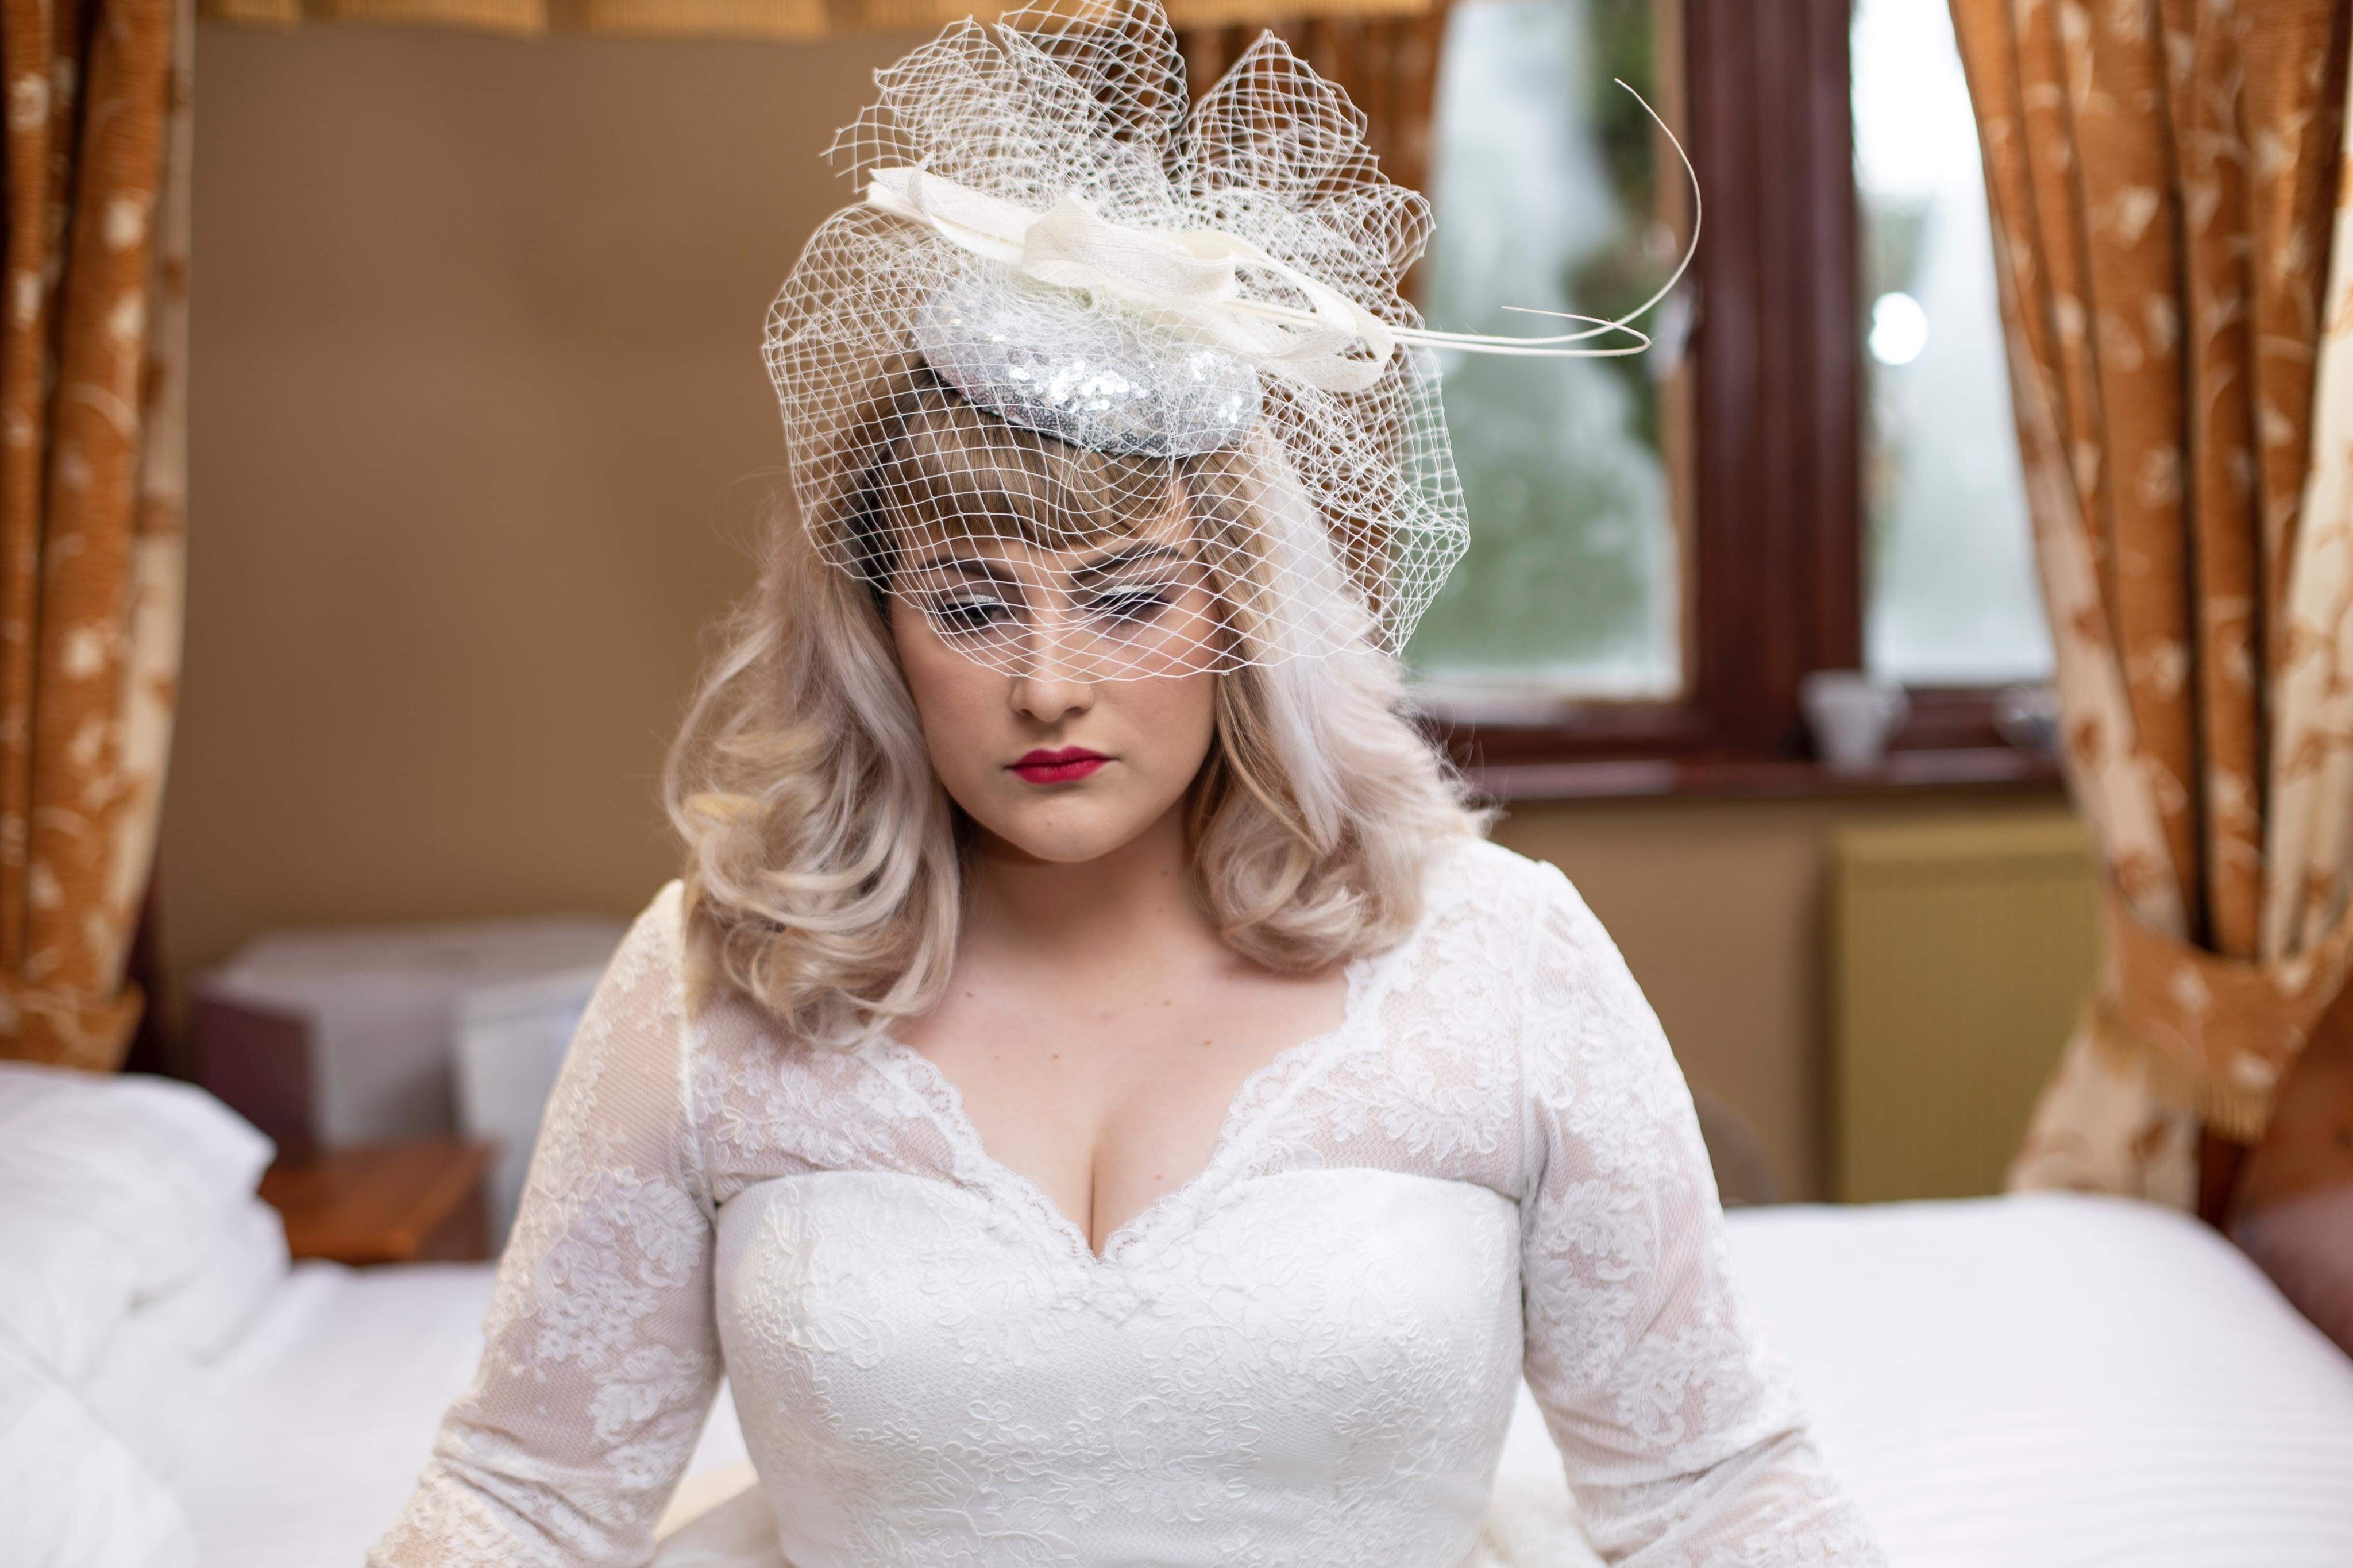 Vintage hair style with birdcage vail 